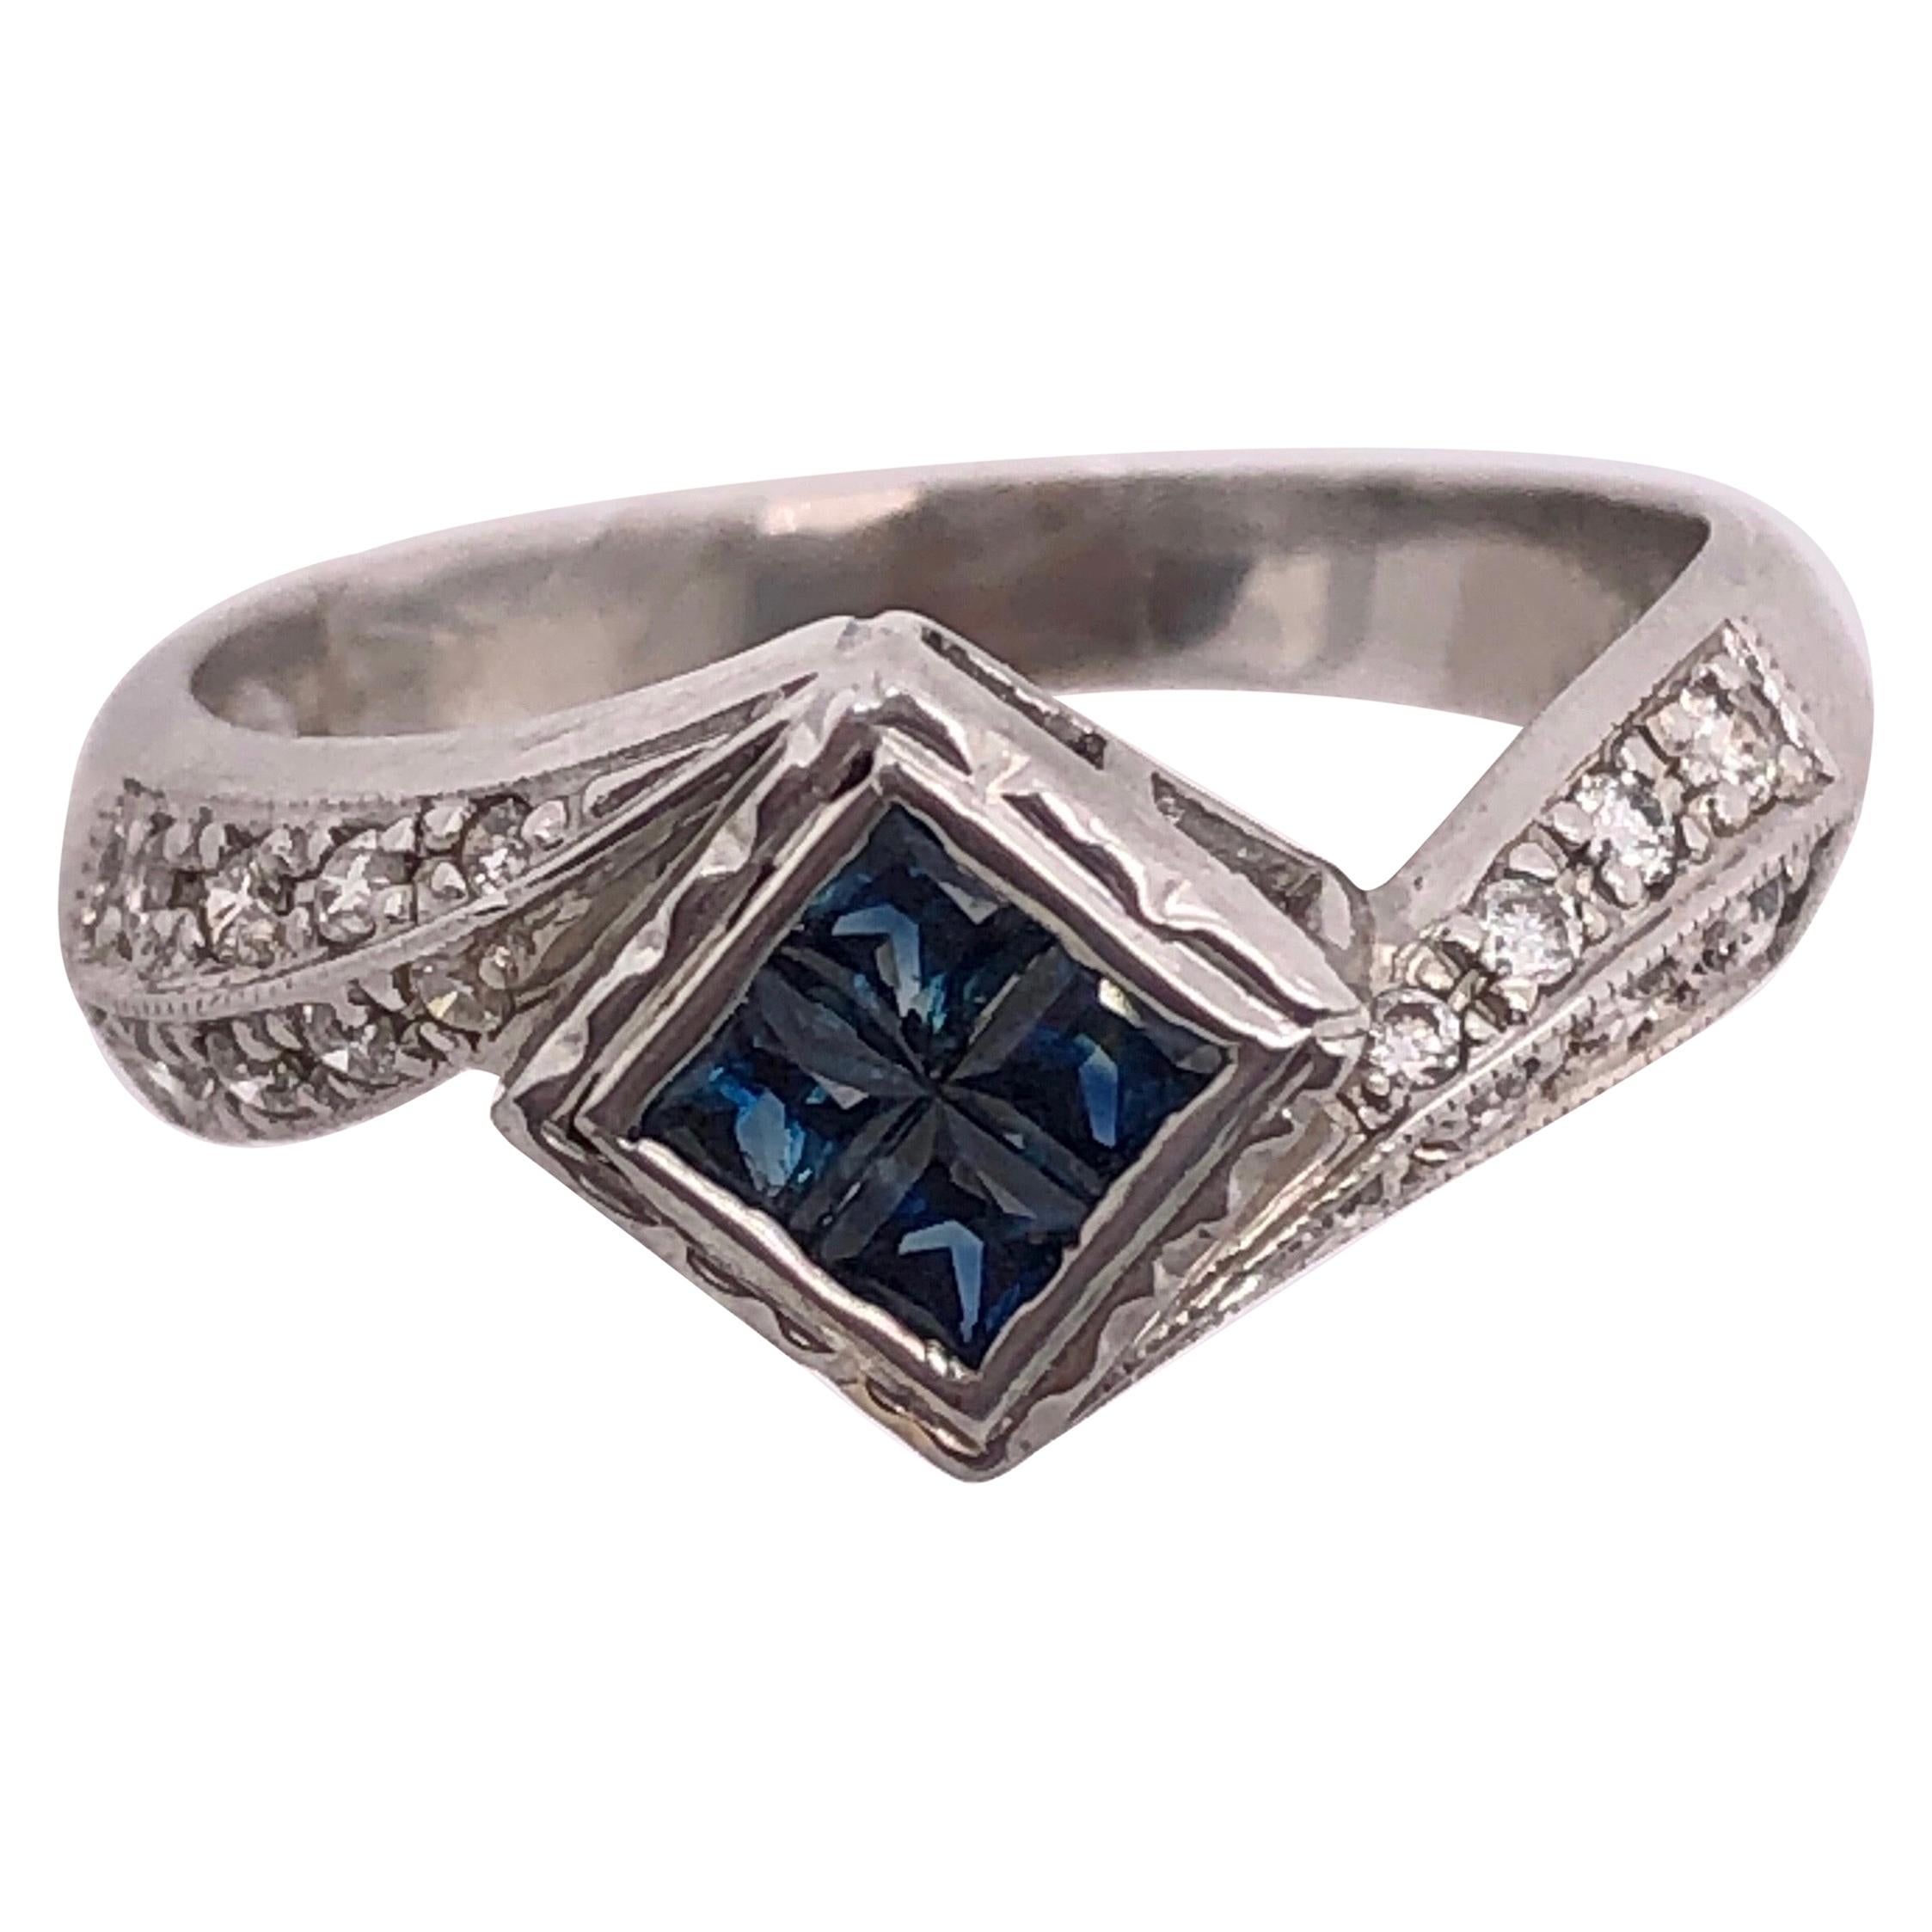 14 Karat White Gold Contemporary Center Sapphire Ring with Diamond Side Accents